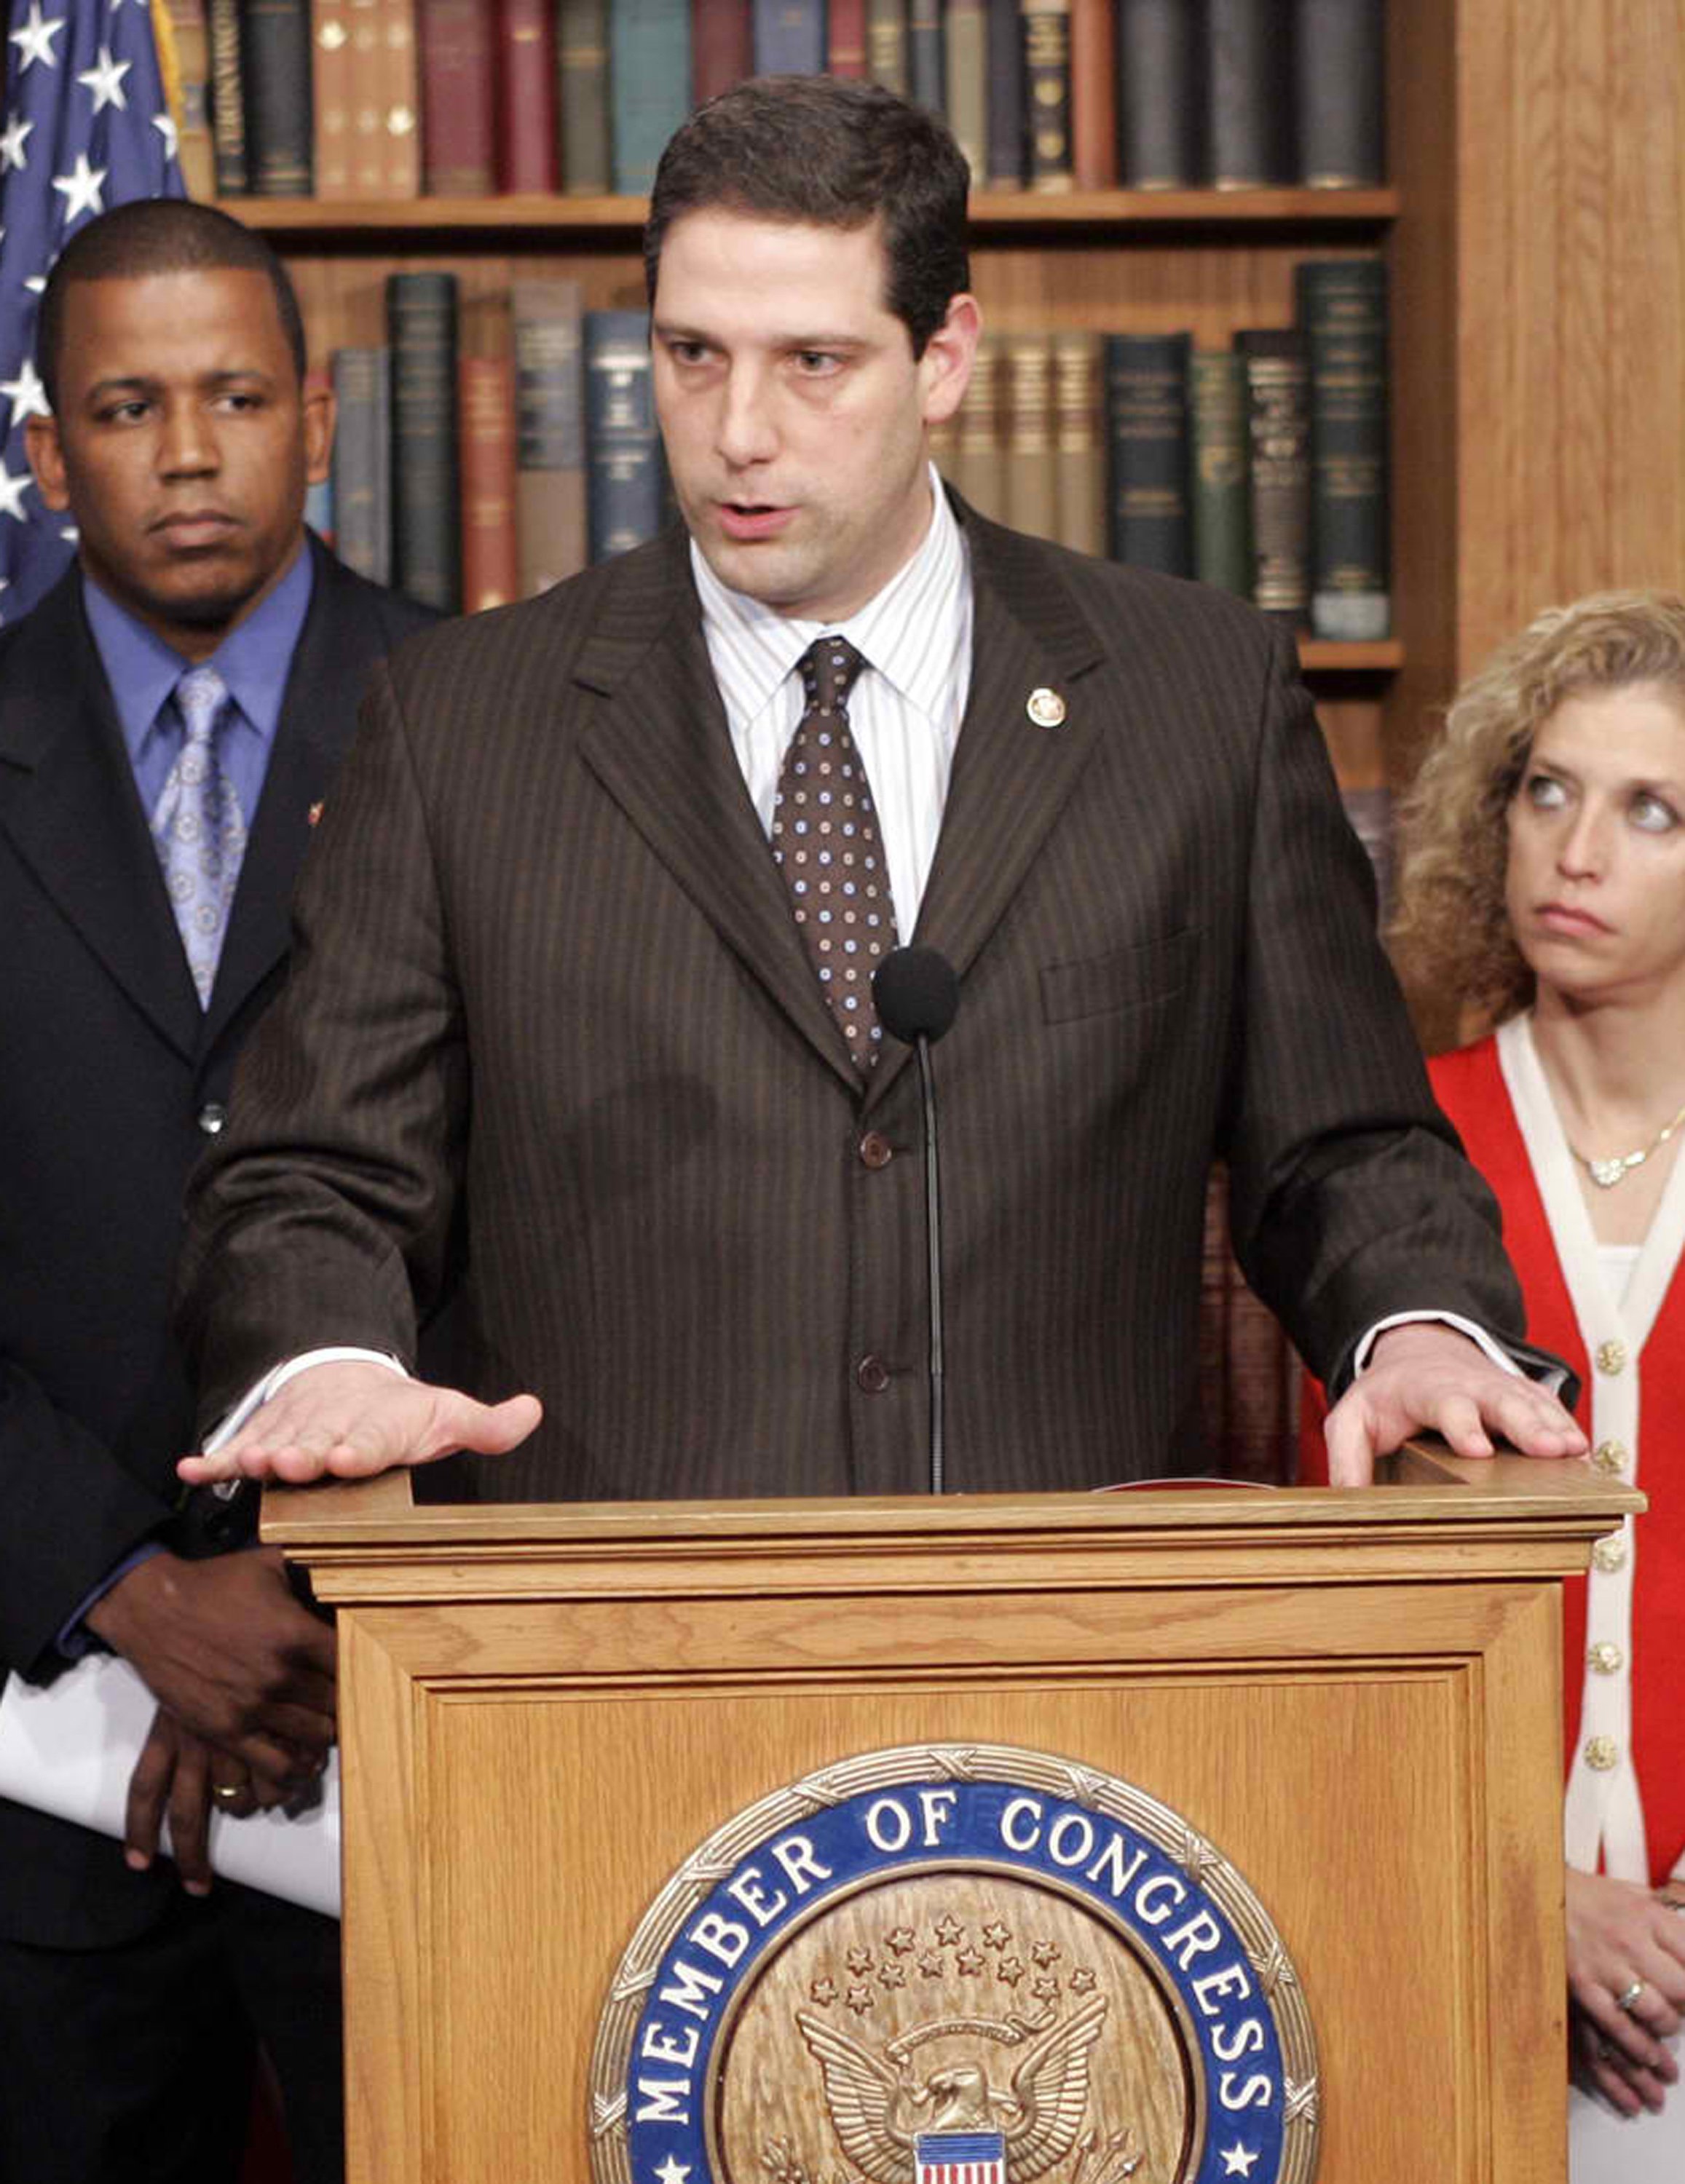 Rep. Tim Ryan, D-Ohio, speaks at a news conference in Washington on Feb. 14, 2007. (Susan Walsh—AP)